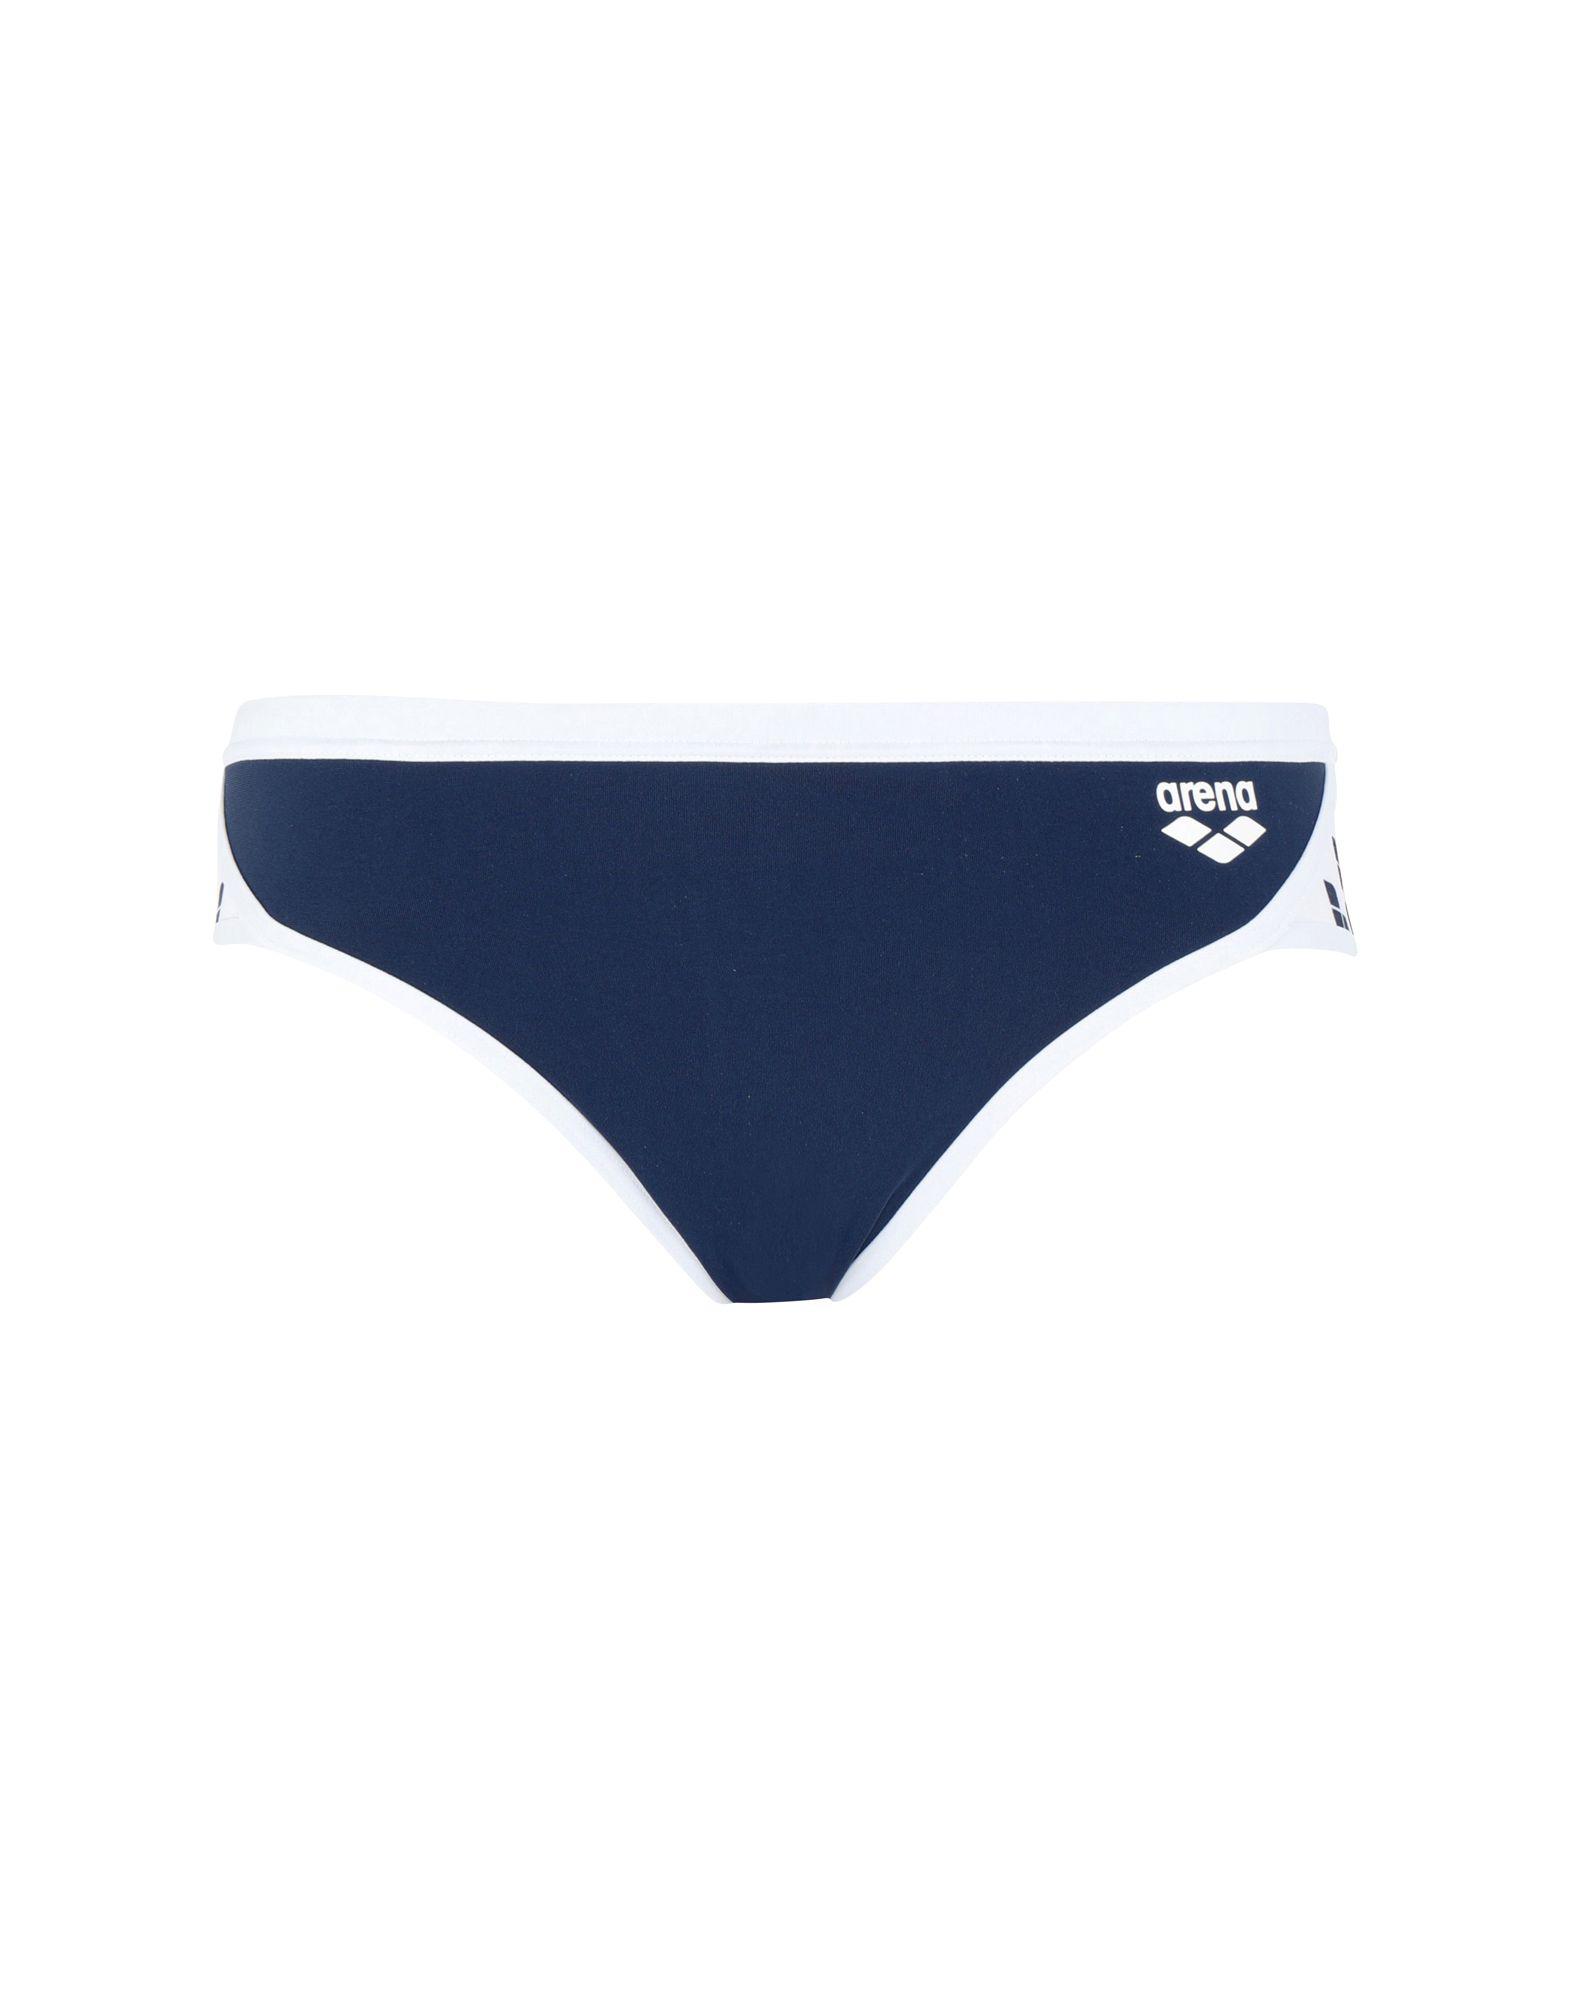 Arena Synthetic Swim Brief in Blue for Men - Lyst